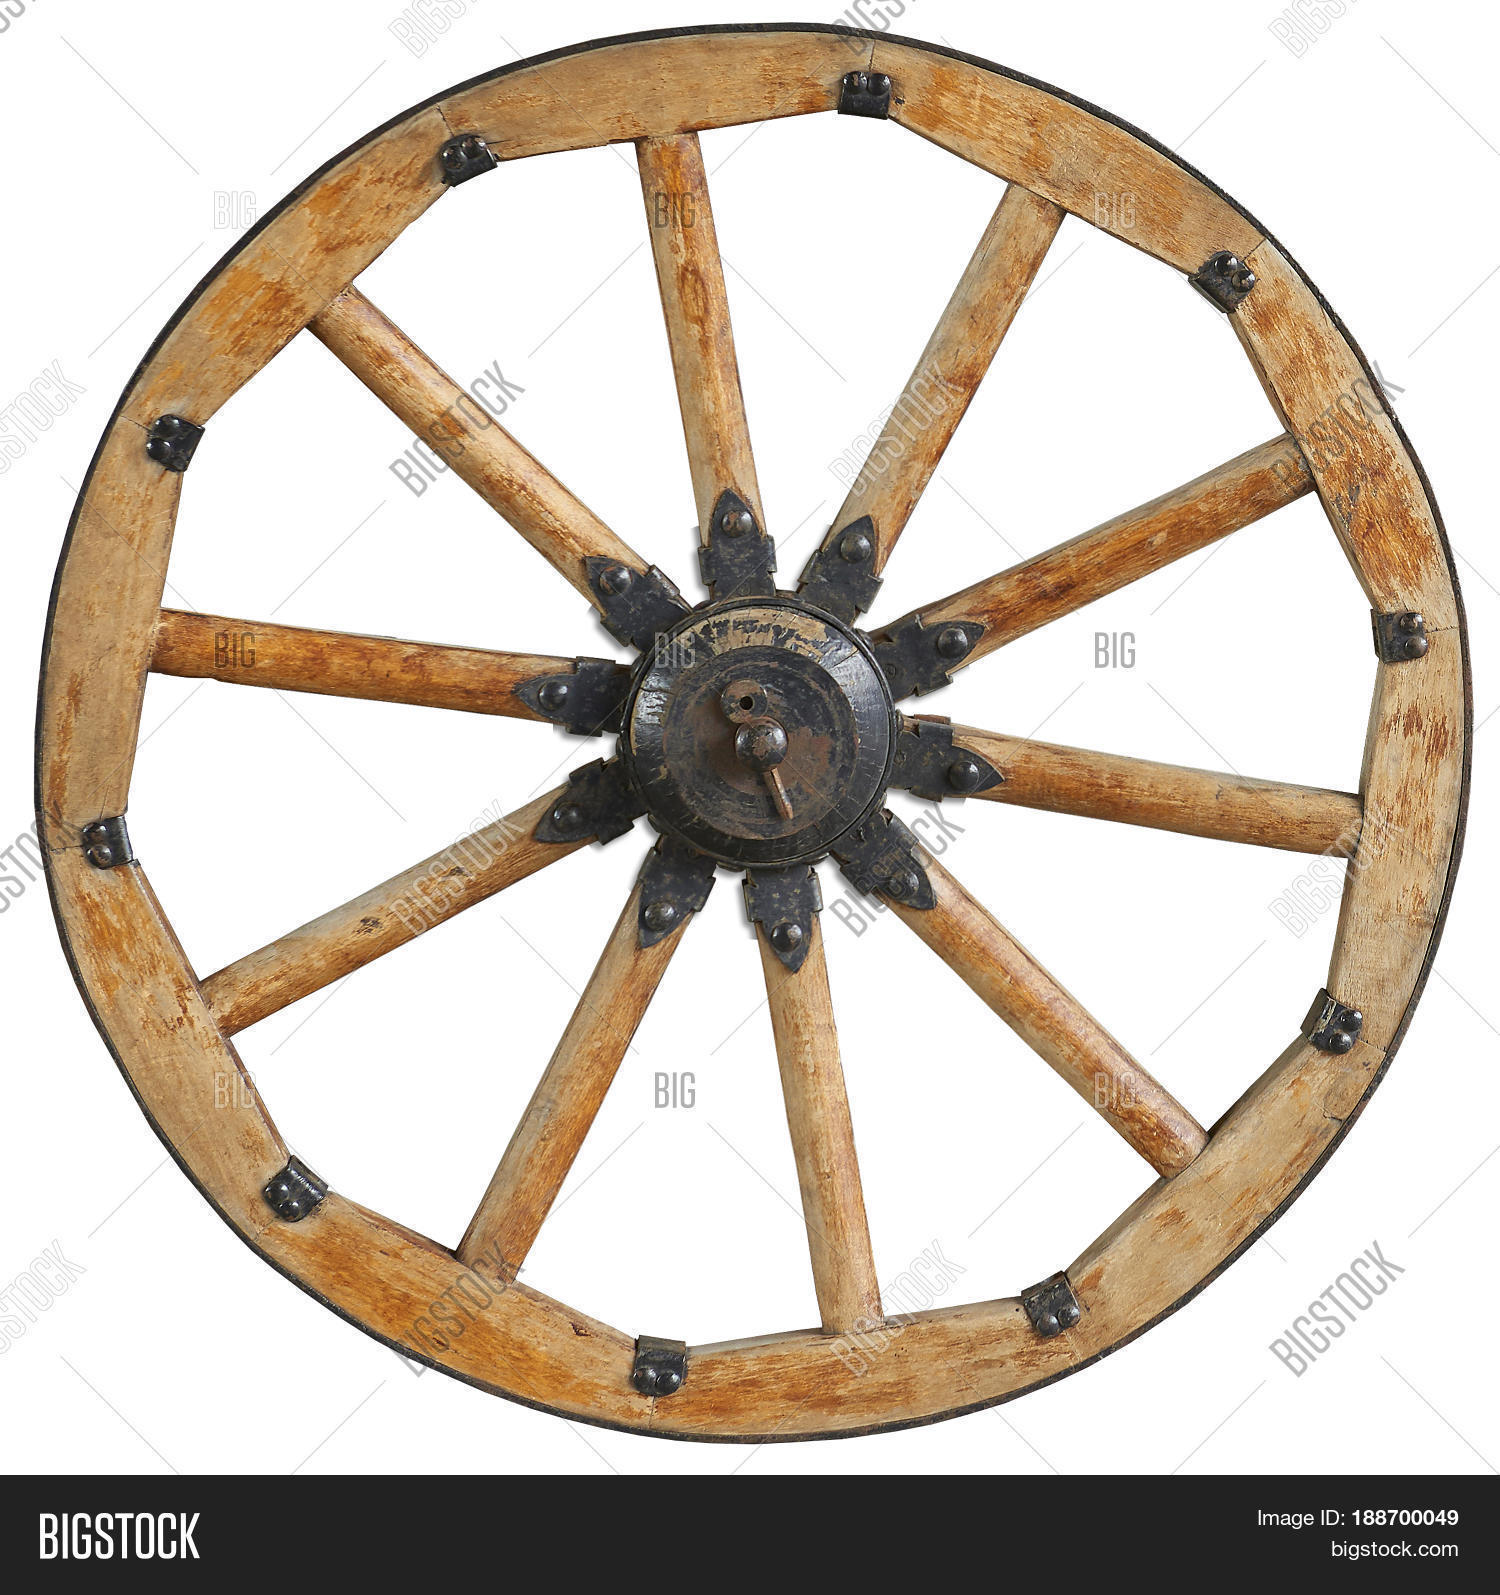 Classic Old Antique Wooden Wagon Image & Photo | Bigstock